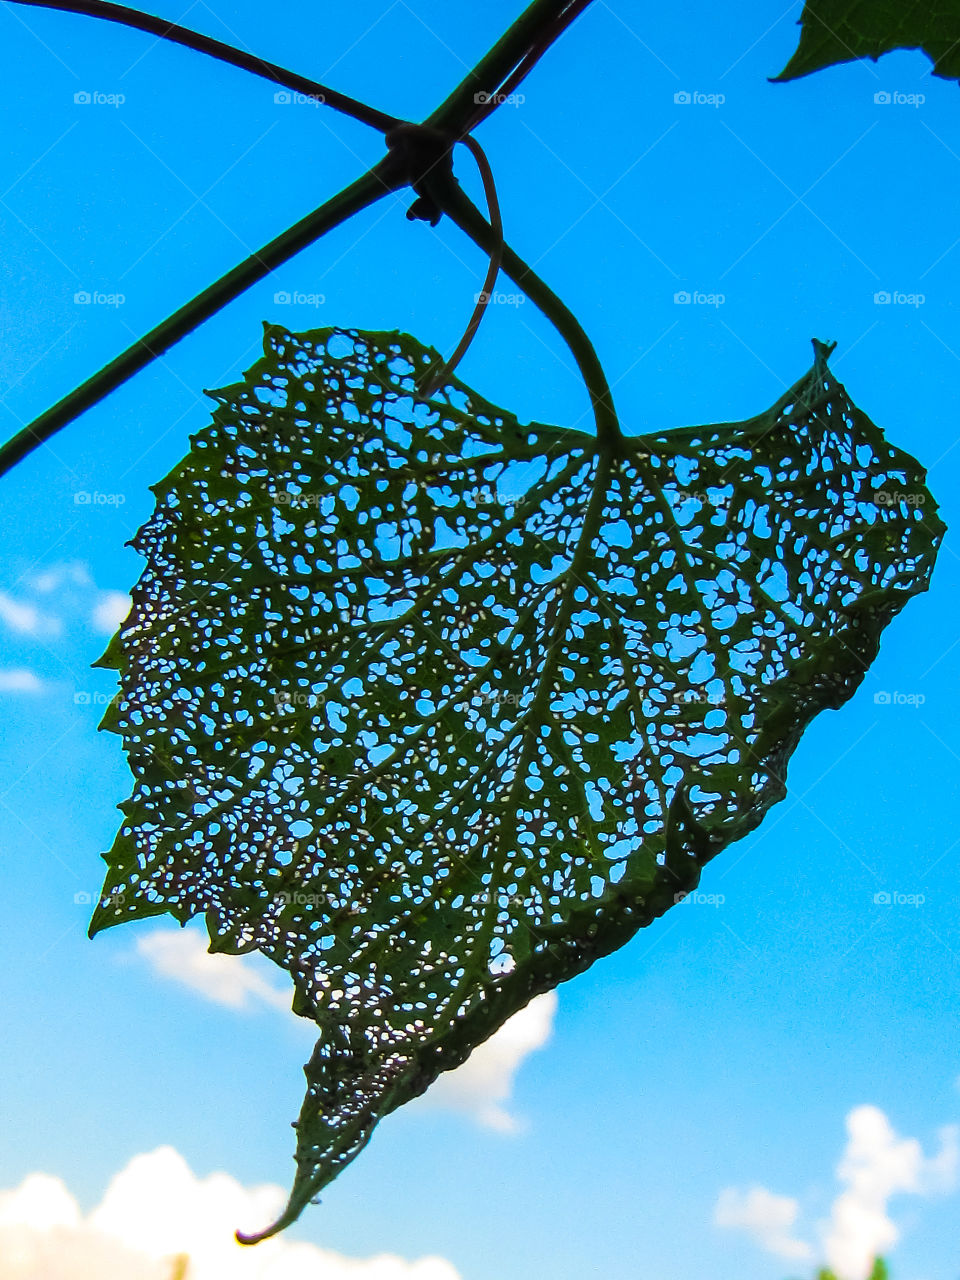 silouett leaf veins with blue sky background